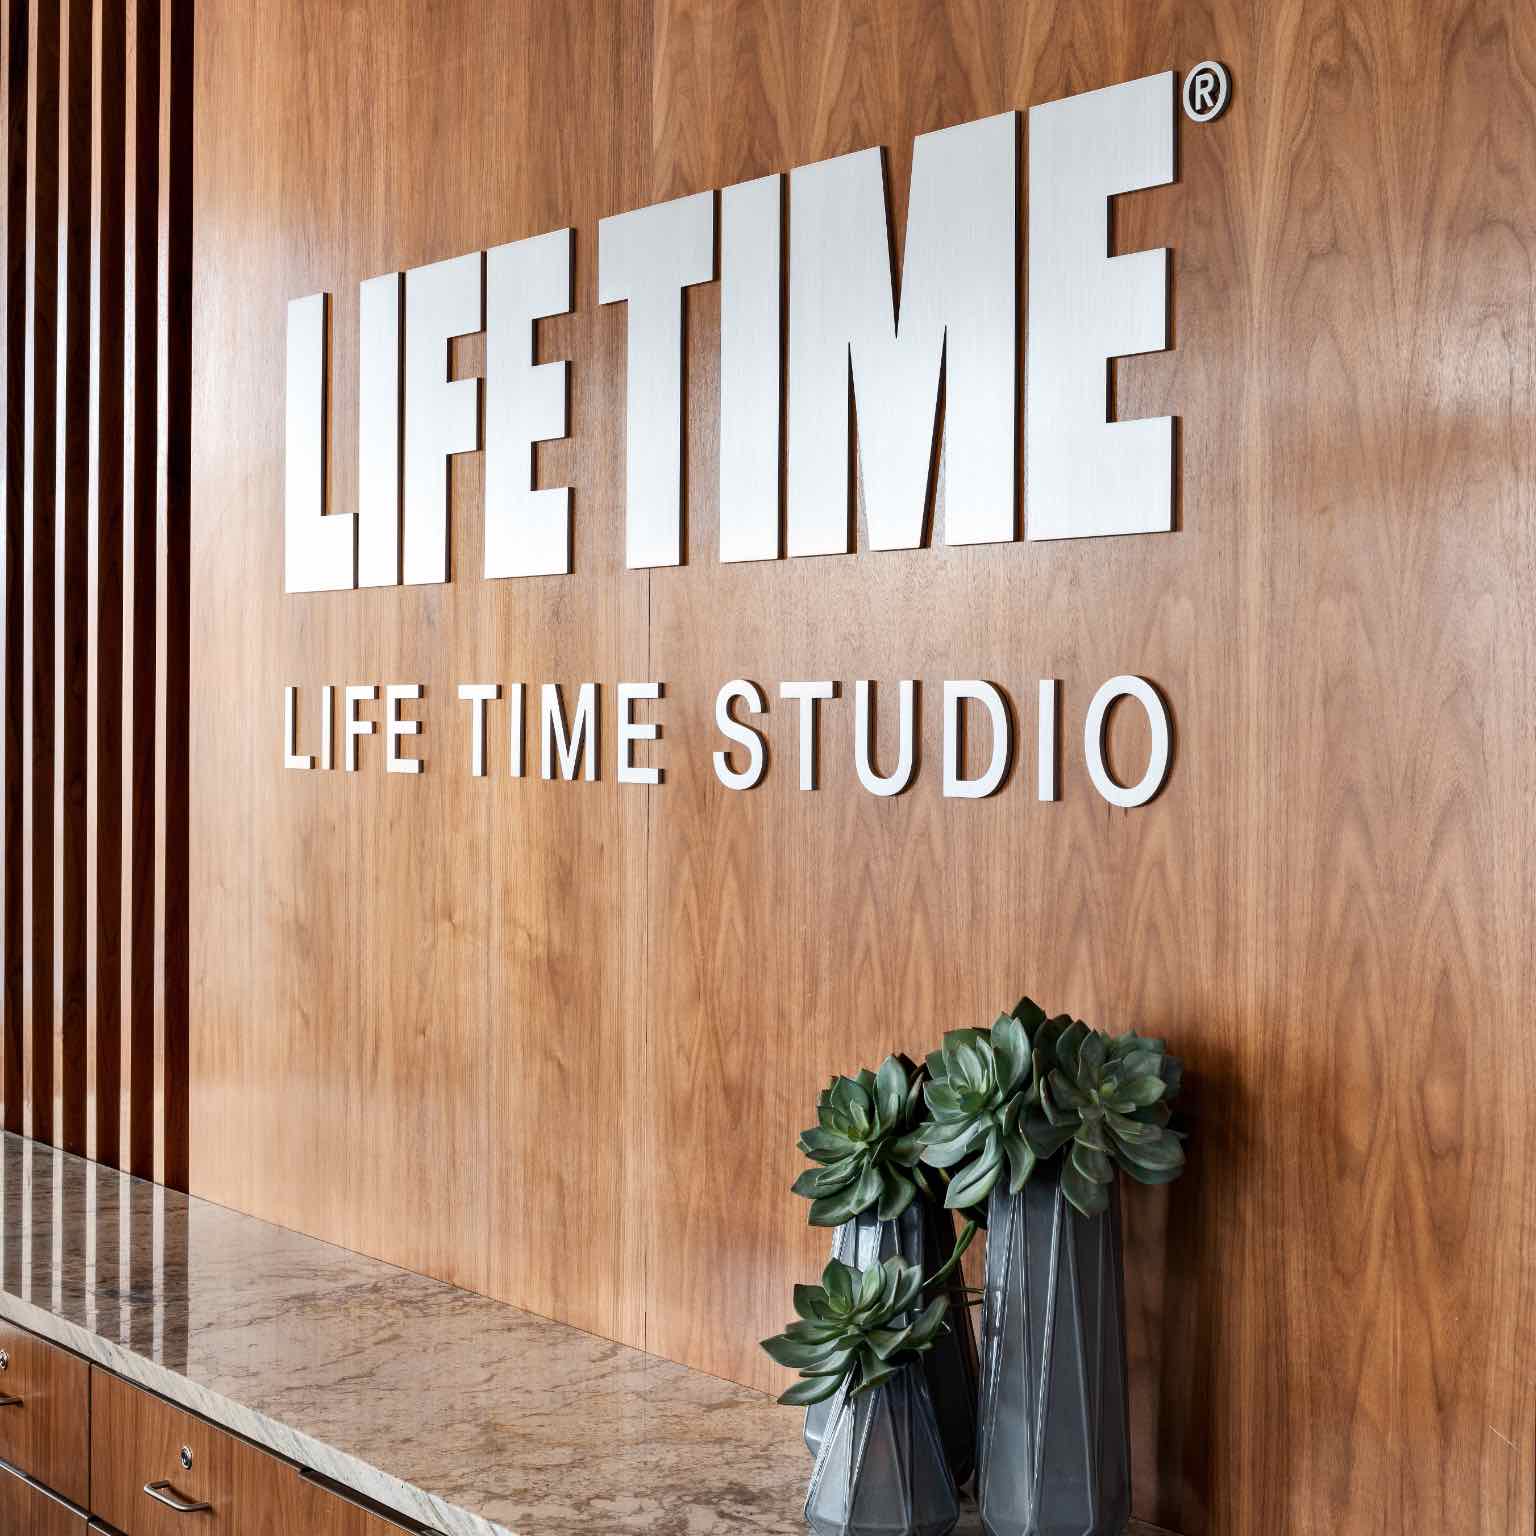 Entrance sign to life time sudio